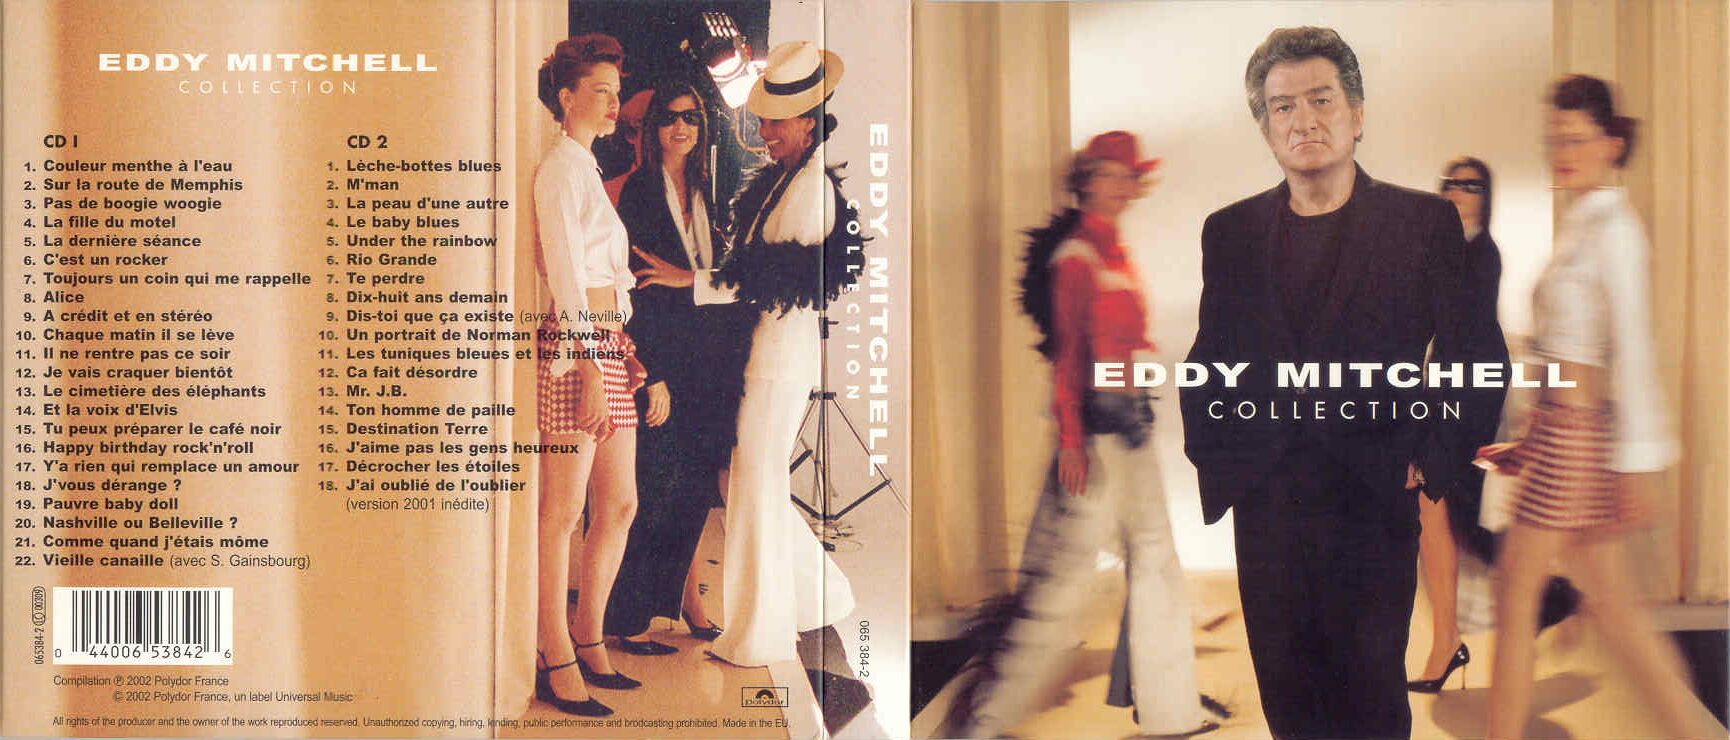 Eddy Mitchell - Collection - The Best Of - Front + Back